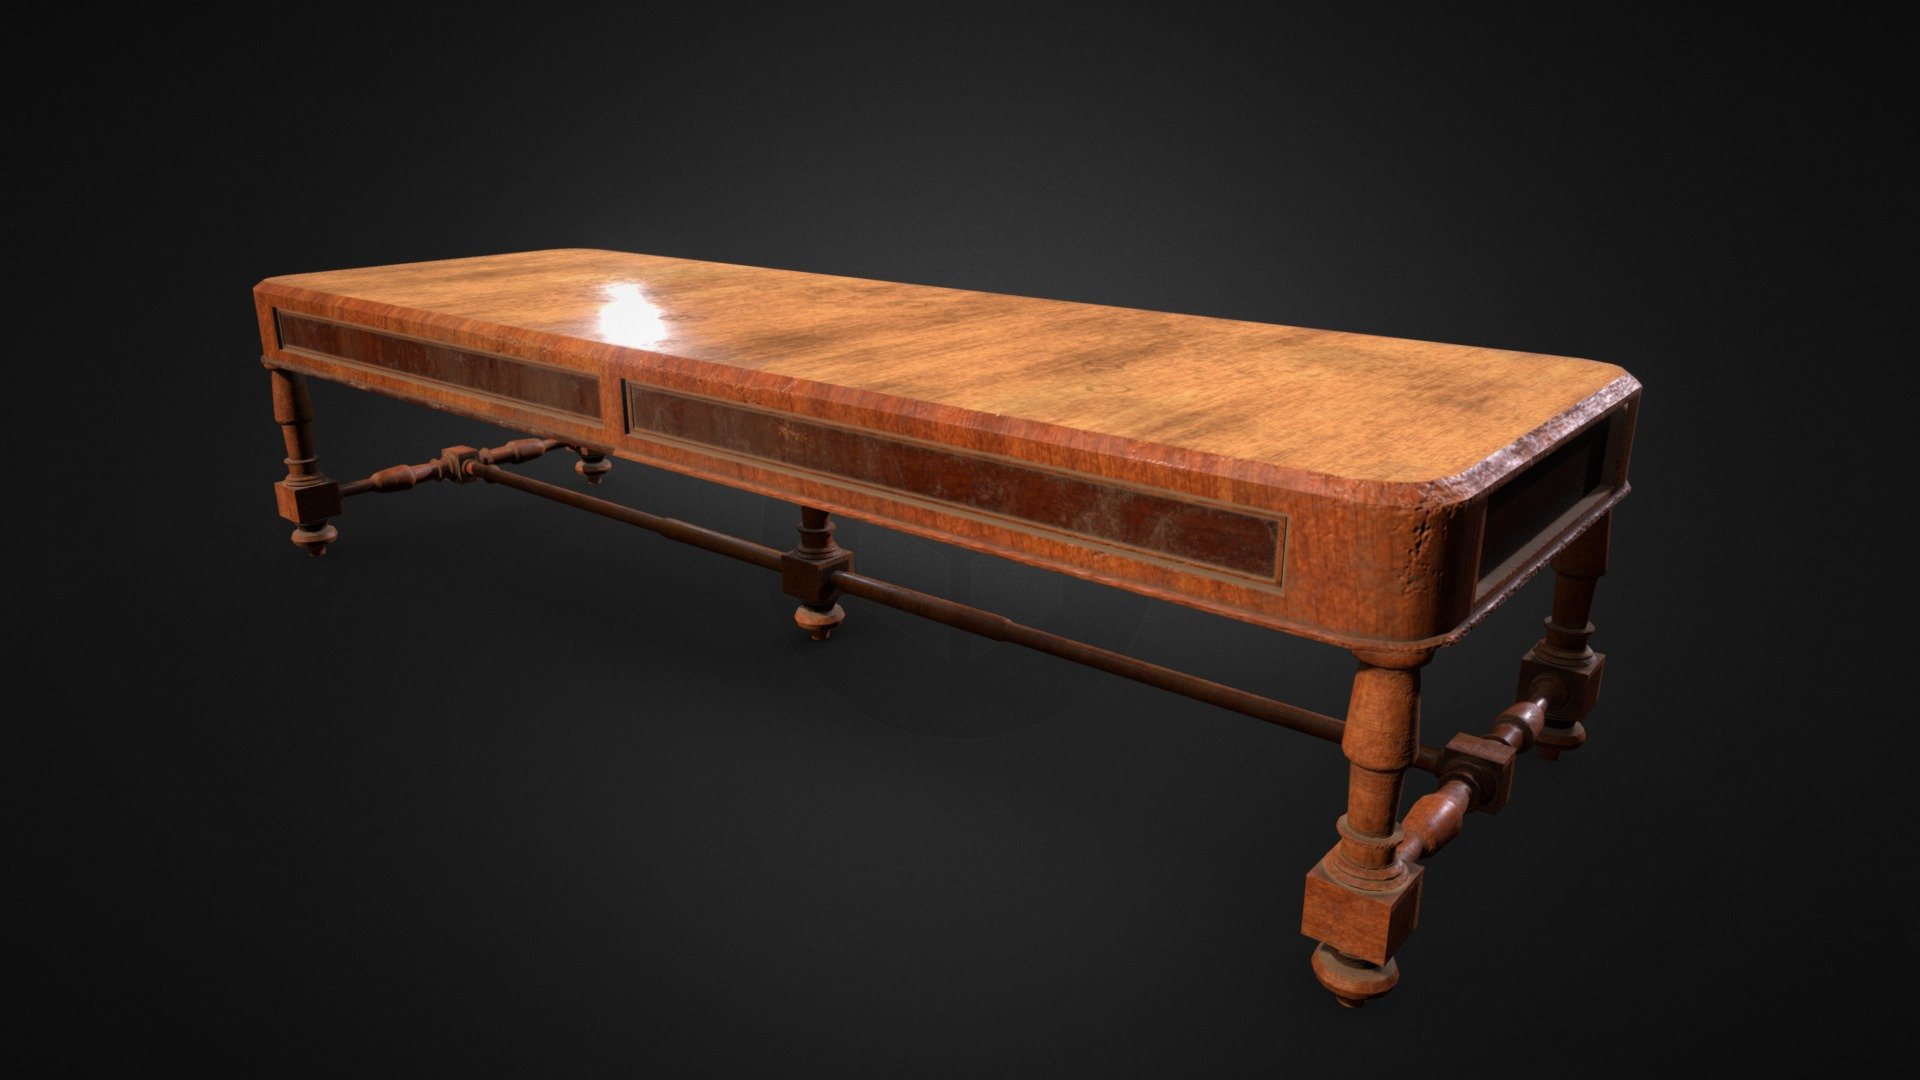 this is a model of a 3d old table special for old environments with ancient furniture, filled with wooden ornaments and decorations, made entirely in blender and textured in substance painter - Old Table 3D Model - 3D model by IPfuentes 3d model